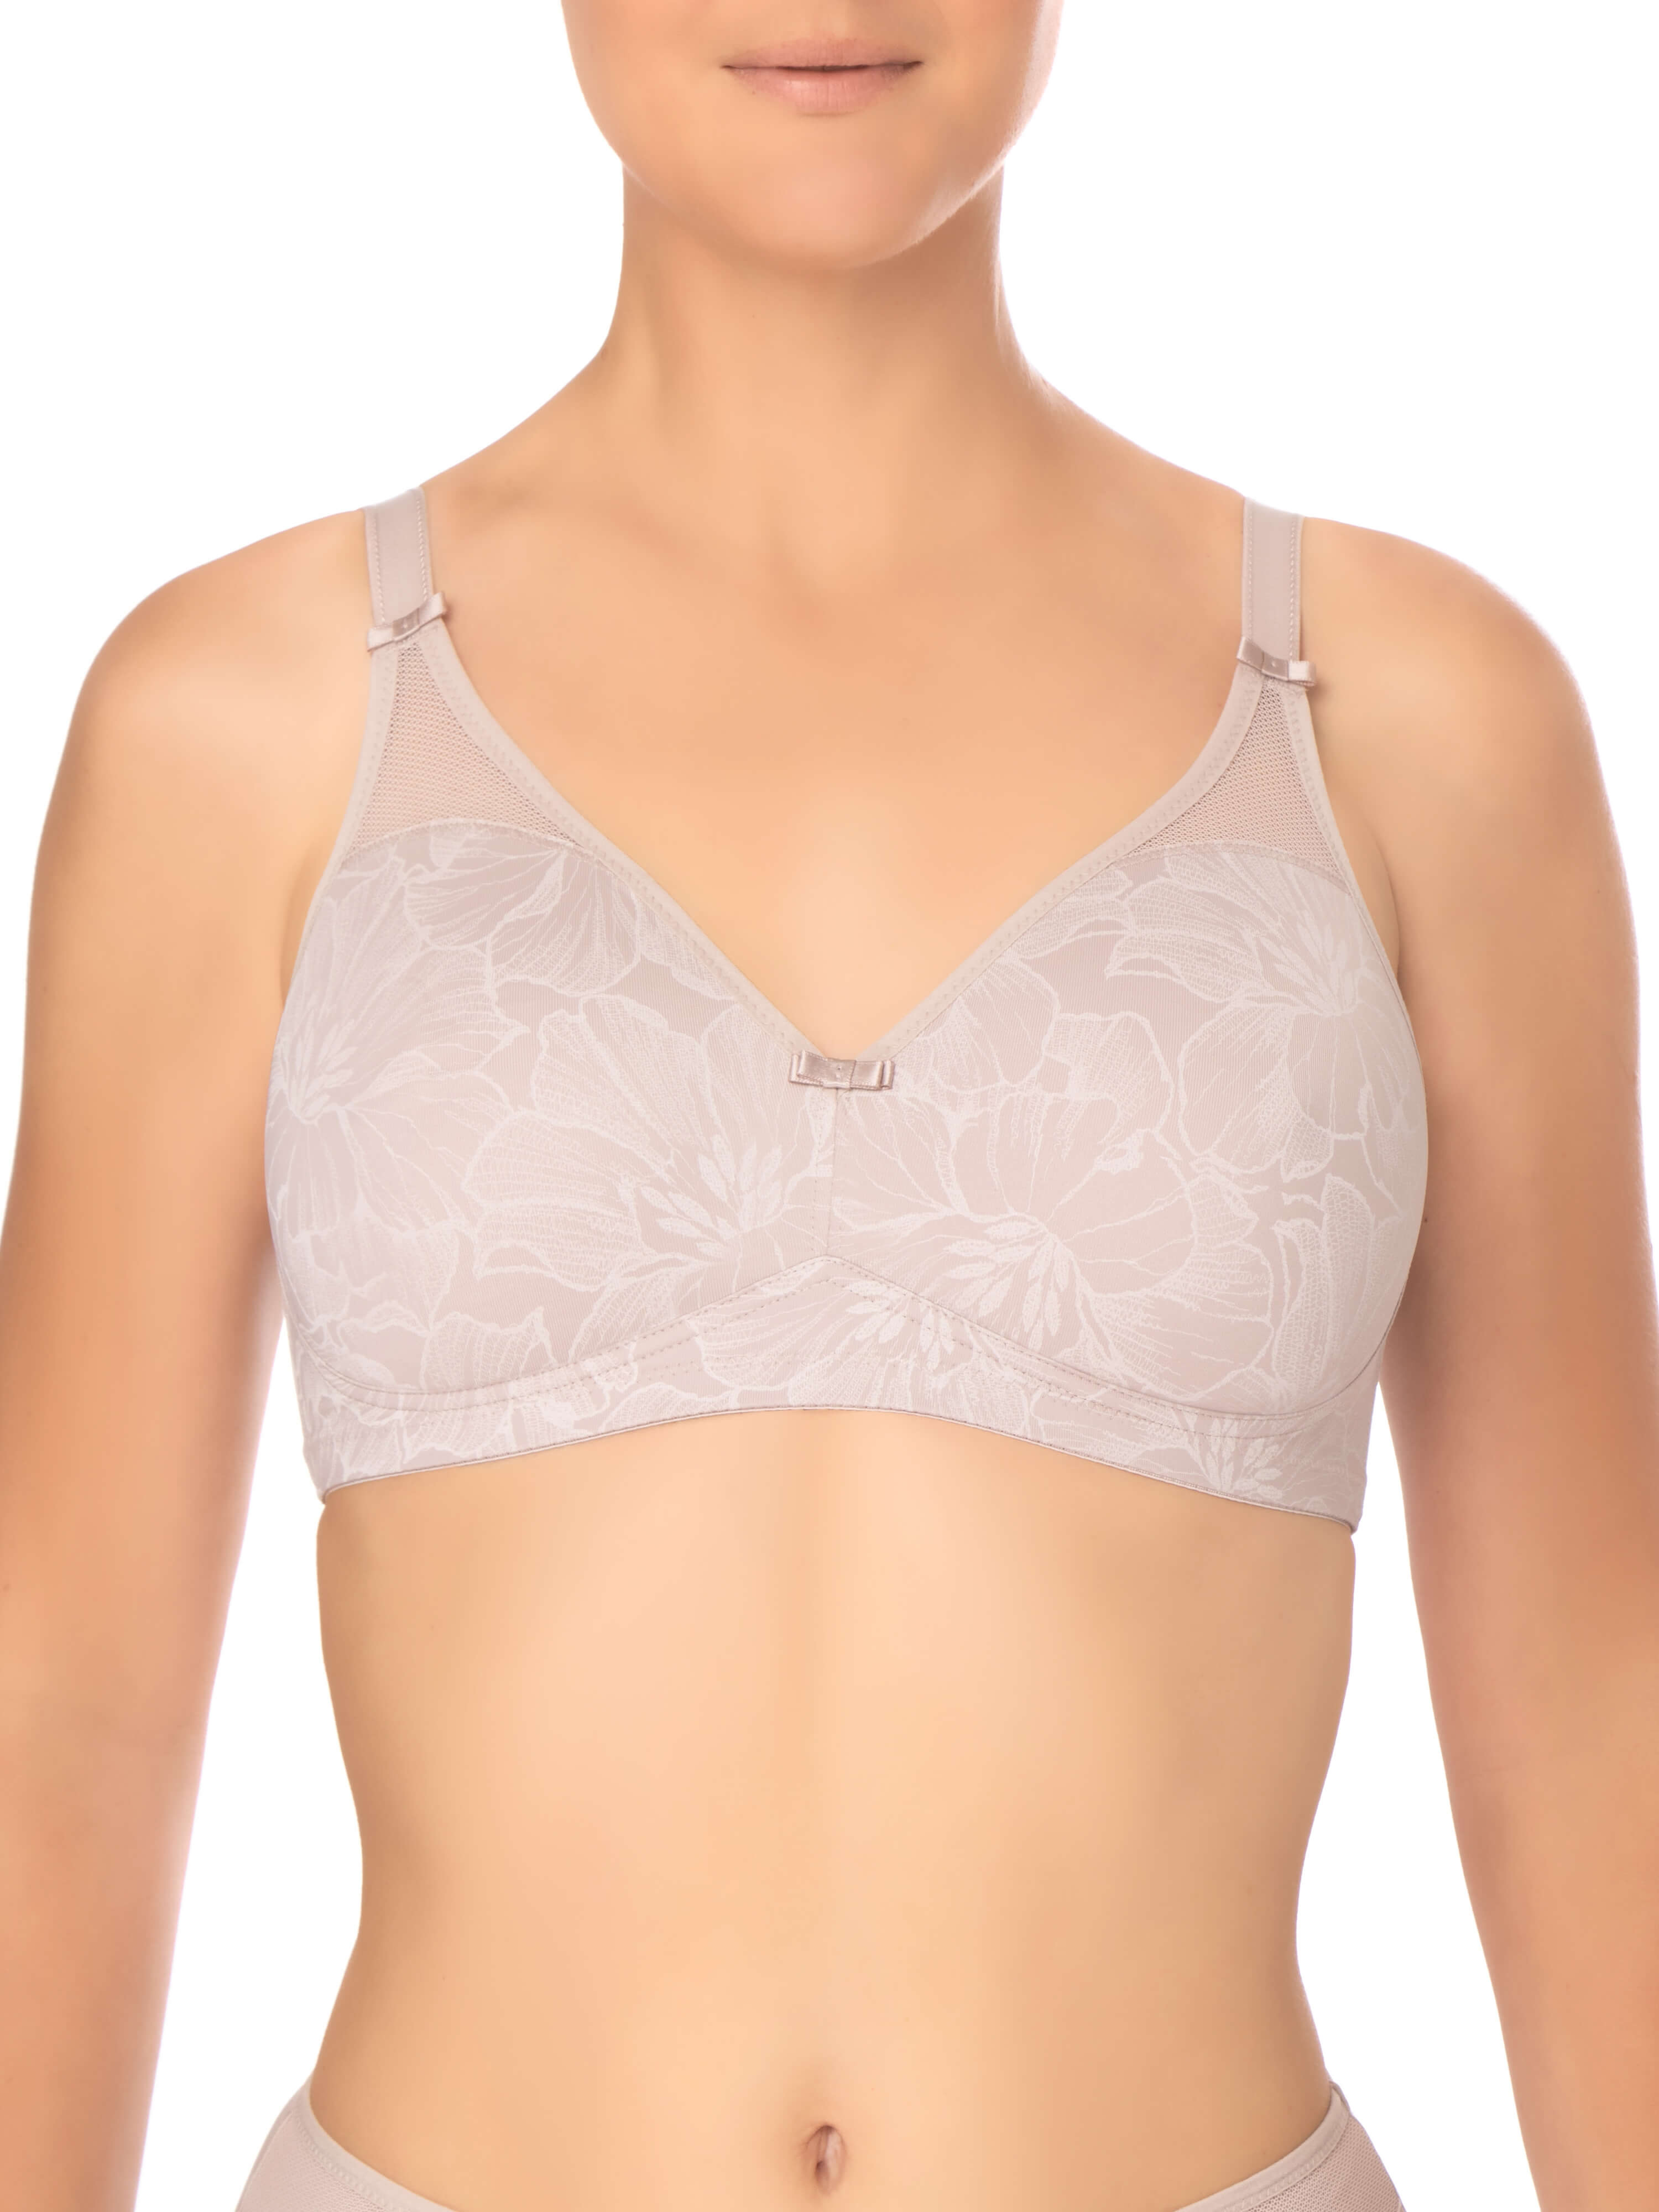 Felina 206289 wired spacer bra VISION DELUXE mauve